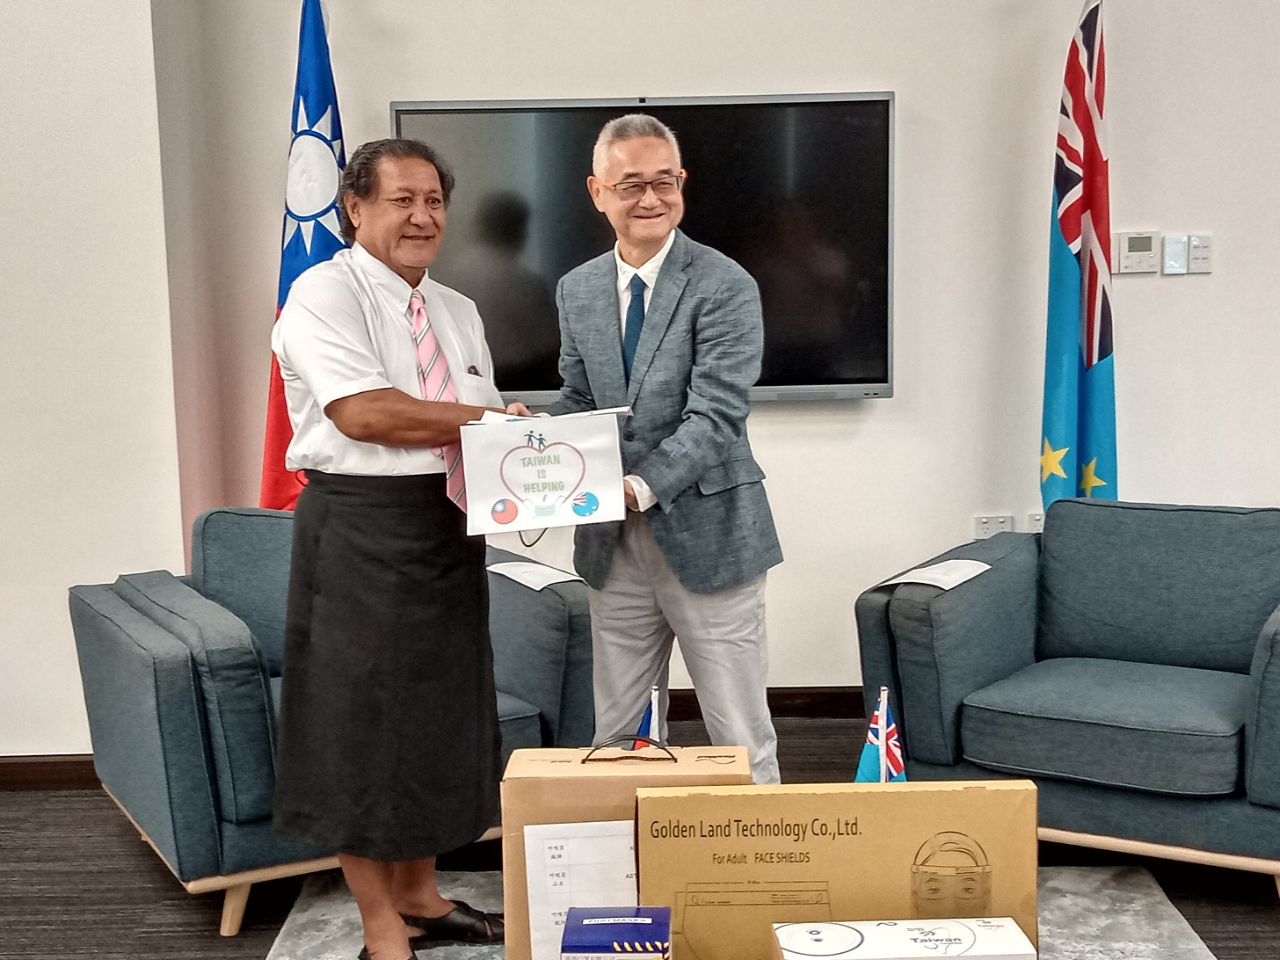 Ambassador Marc Su, on behalf of the people and government of the ROC (Taiwan), handed over another batch of medical equipment (ventilators and disposable face shields) to the Hon. Isaia Taape, Minister of Health of Tuvalu, on October 13, at the Tamasi Puapua Convention Center. Minister Taape expressed his gratitude for Taiwan’s continuous support.